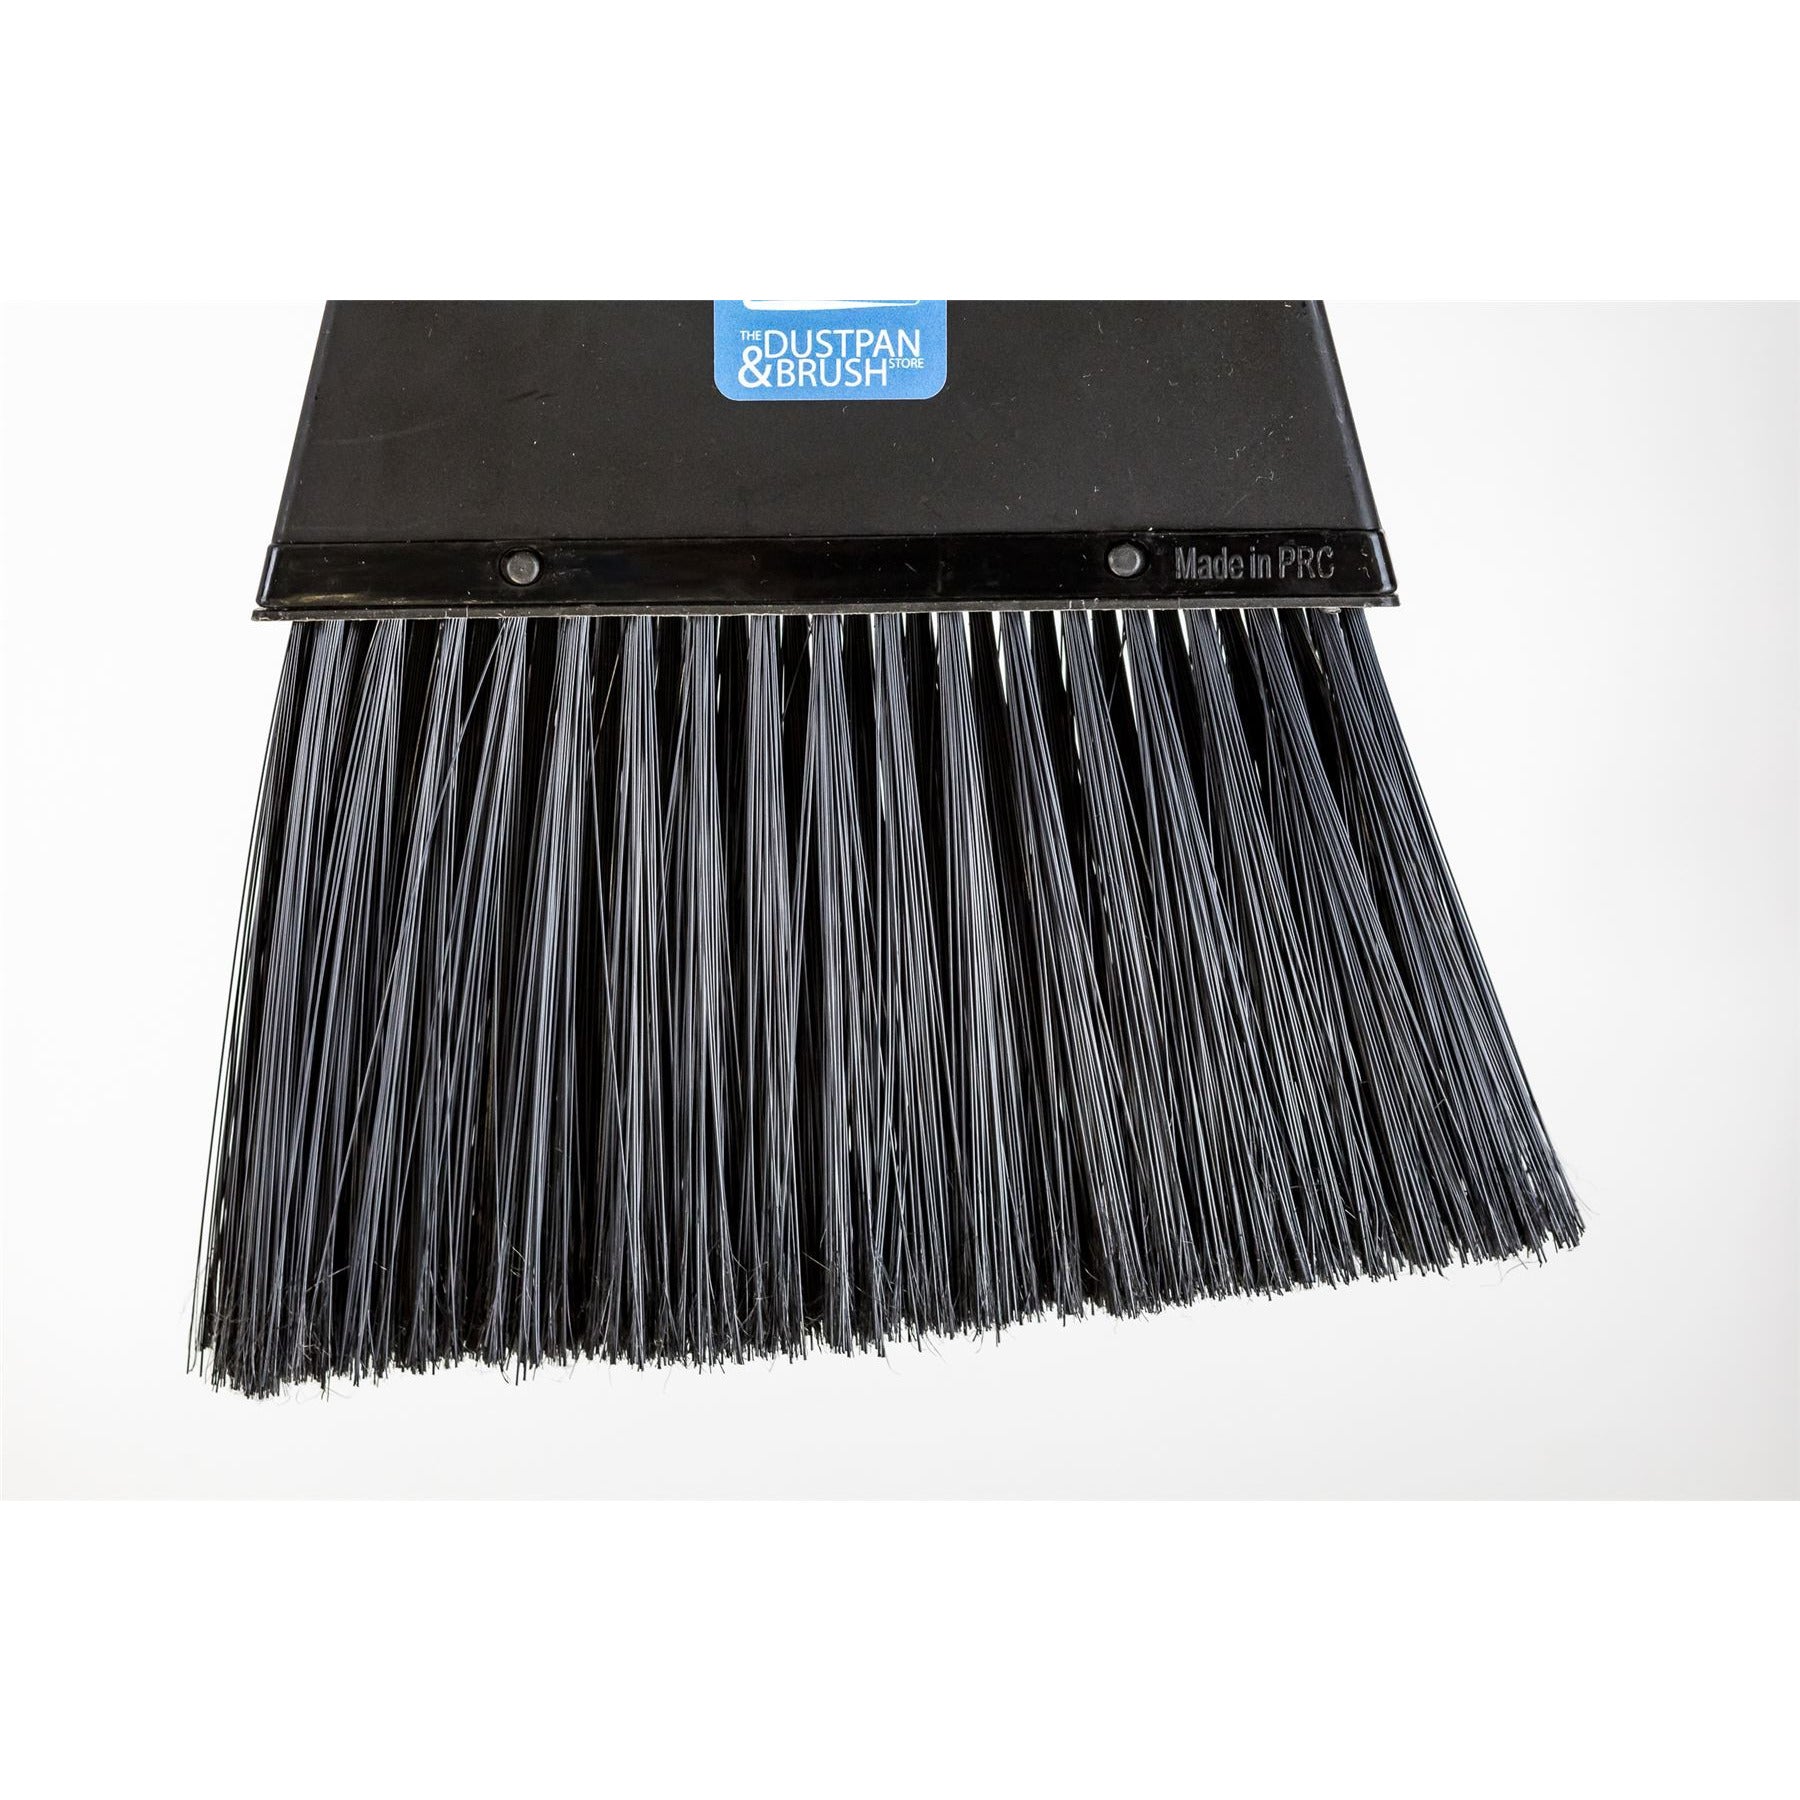 Replacement Soft Brush for Long Handled Dustpan and Brush Lobby Broom Type 1 - The Dustpan and Brush Store